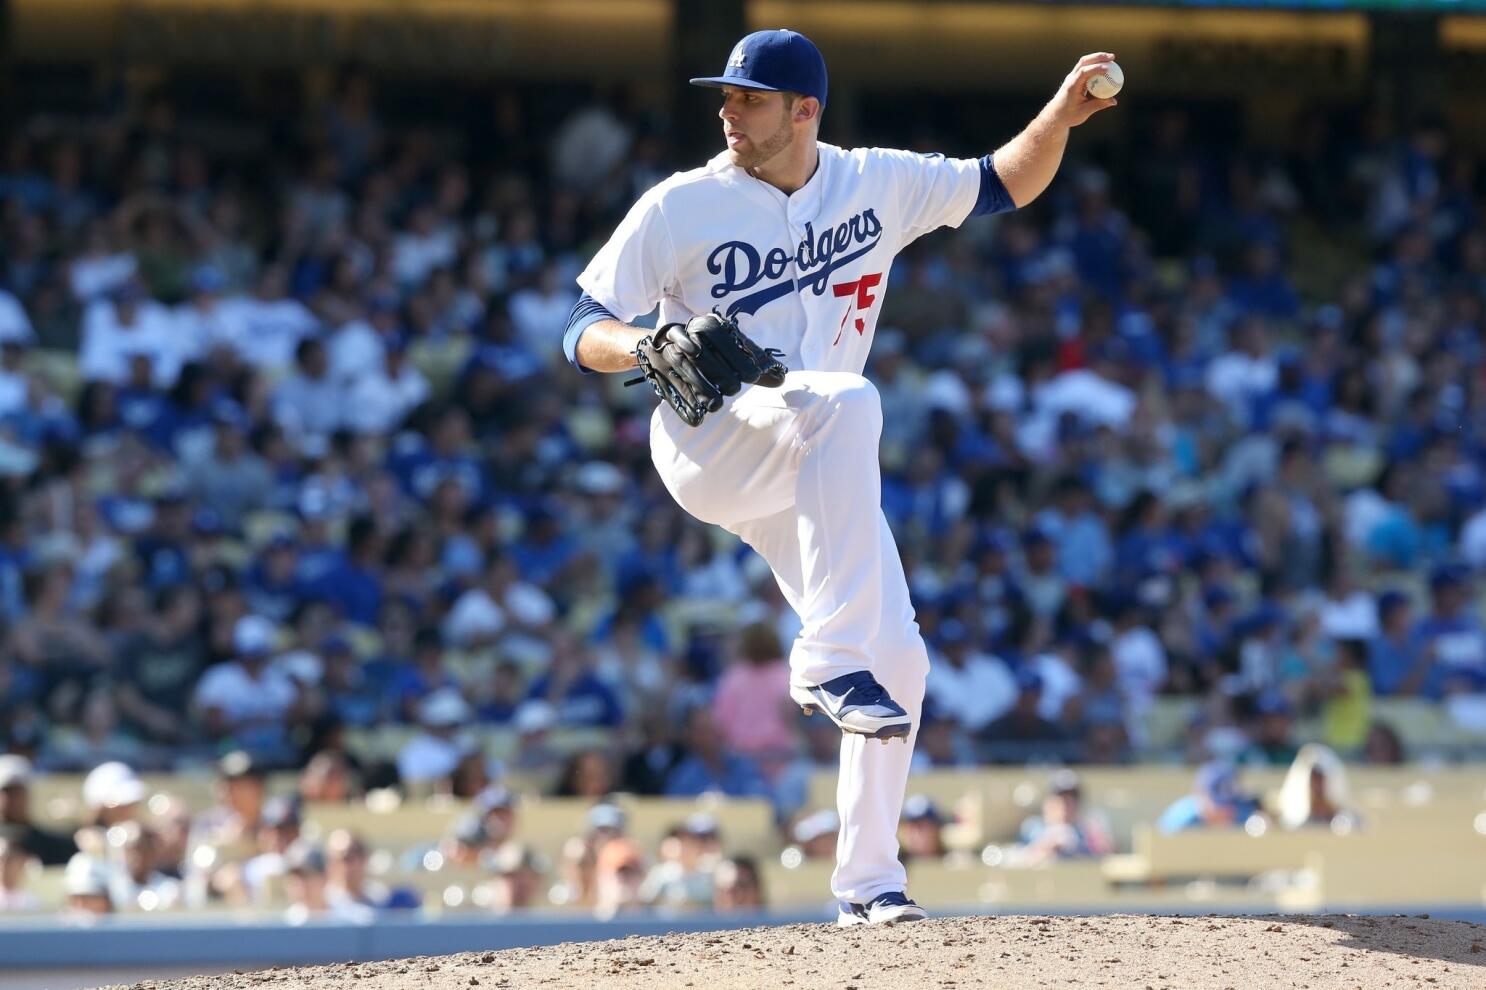 Los Angeles Dodgers reliever Paco Rodriguez returns to team after